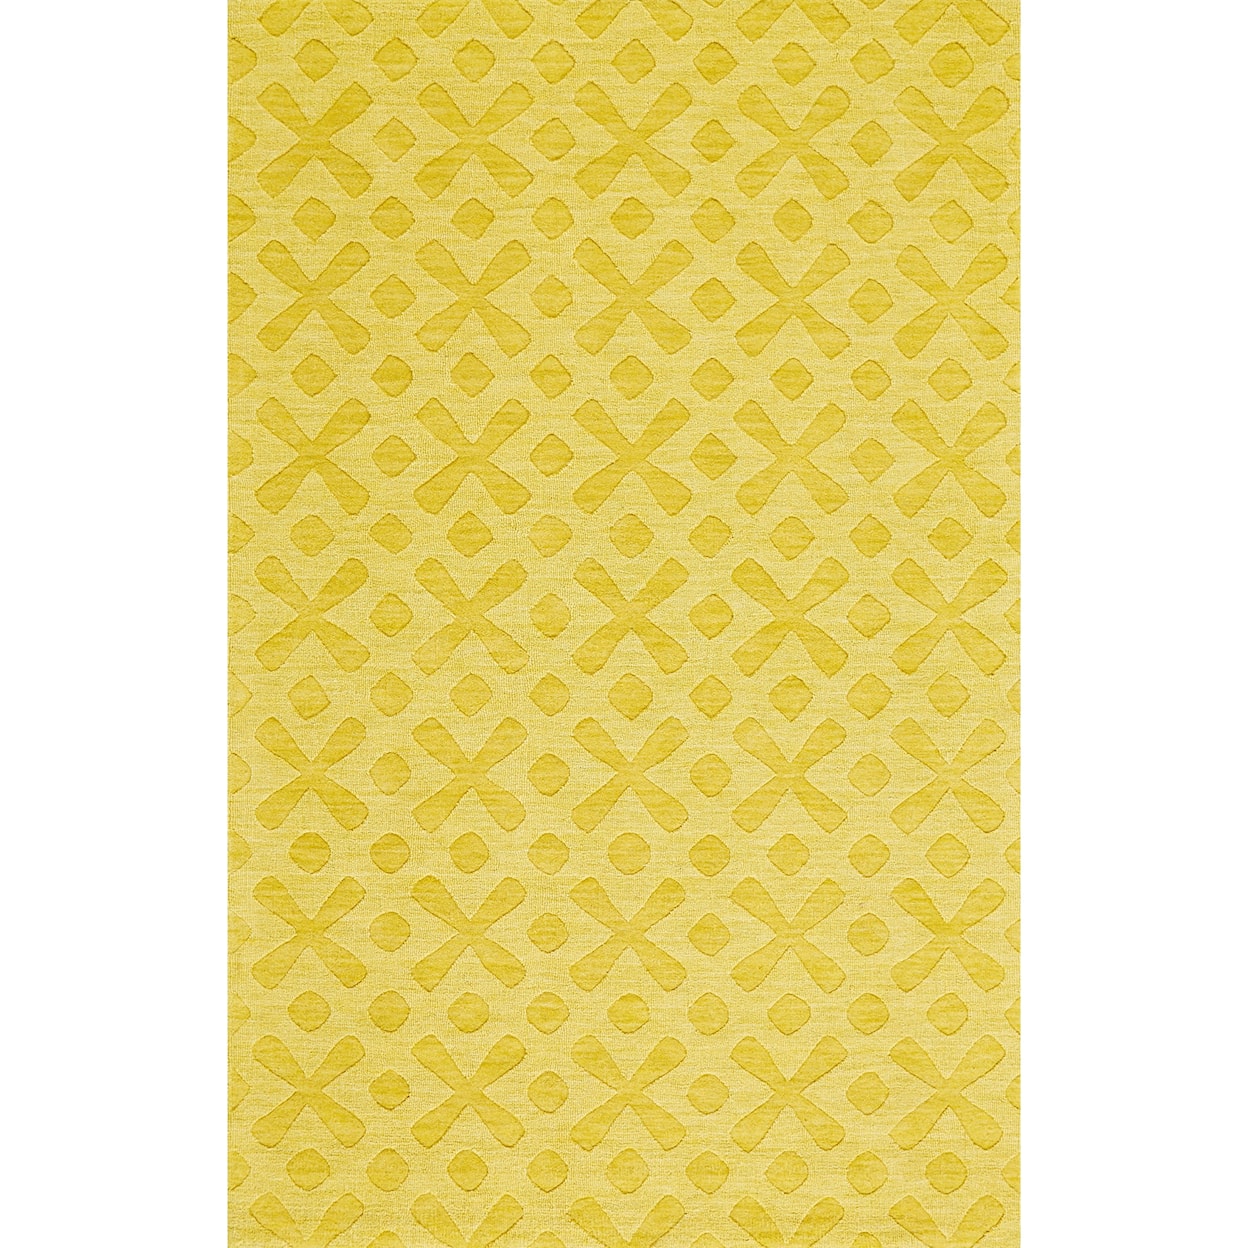 Feizy Rugs Soma Yellow 8' X 11' Area Rug